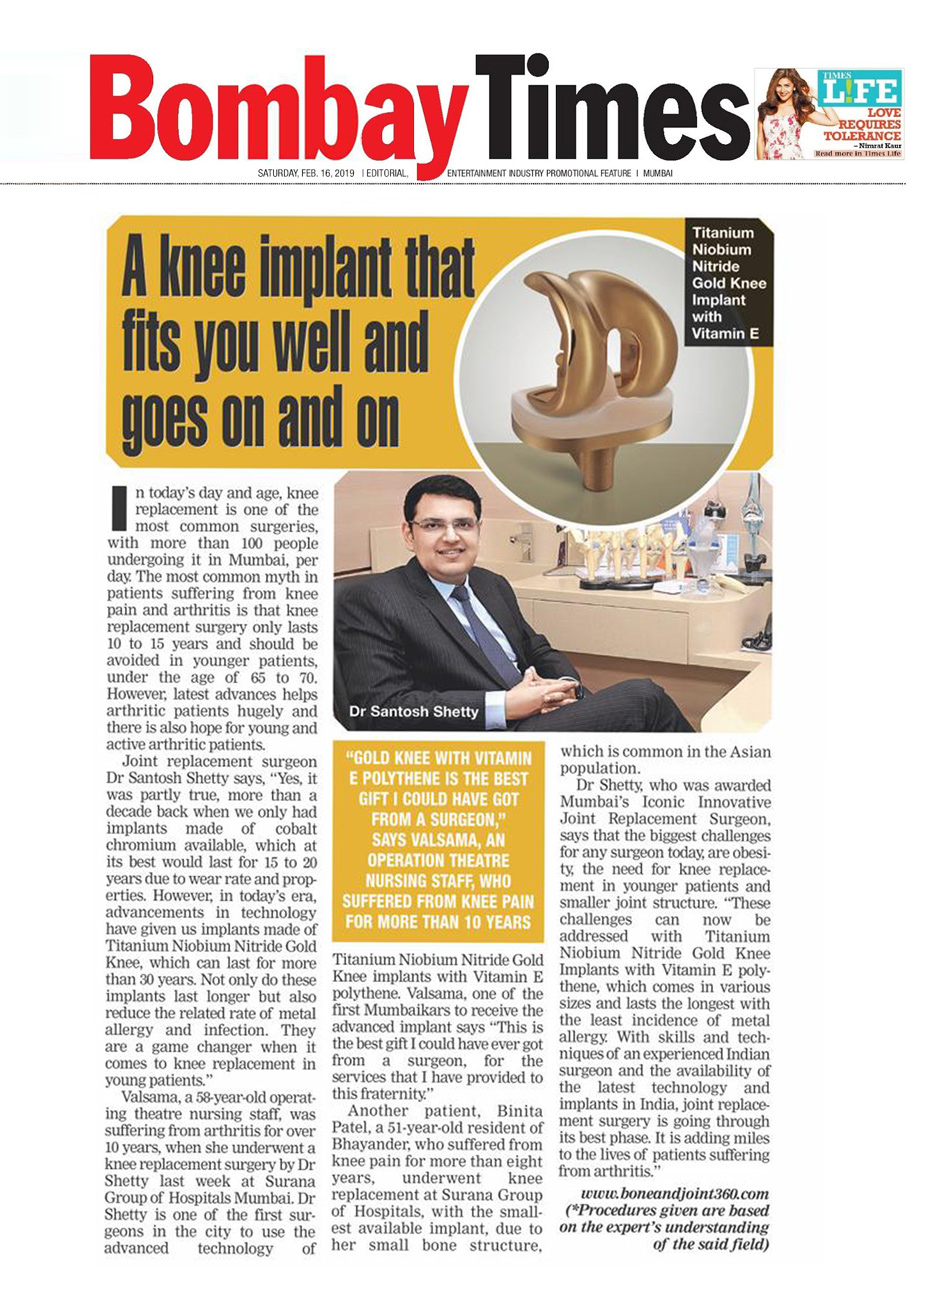 First Joint Replacement Surgeon in India to Implant Smallest Size Opulent Gold Knee Femur